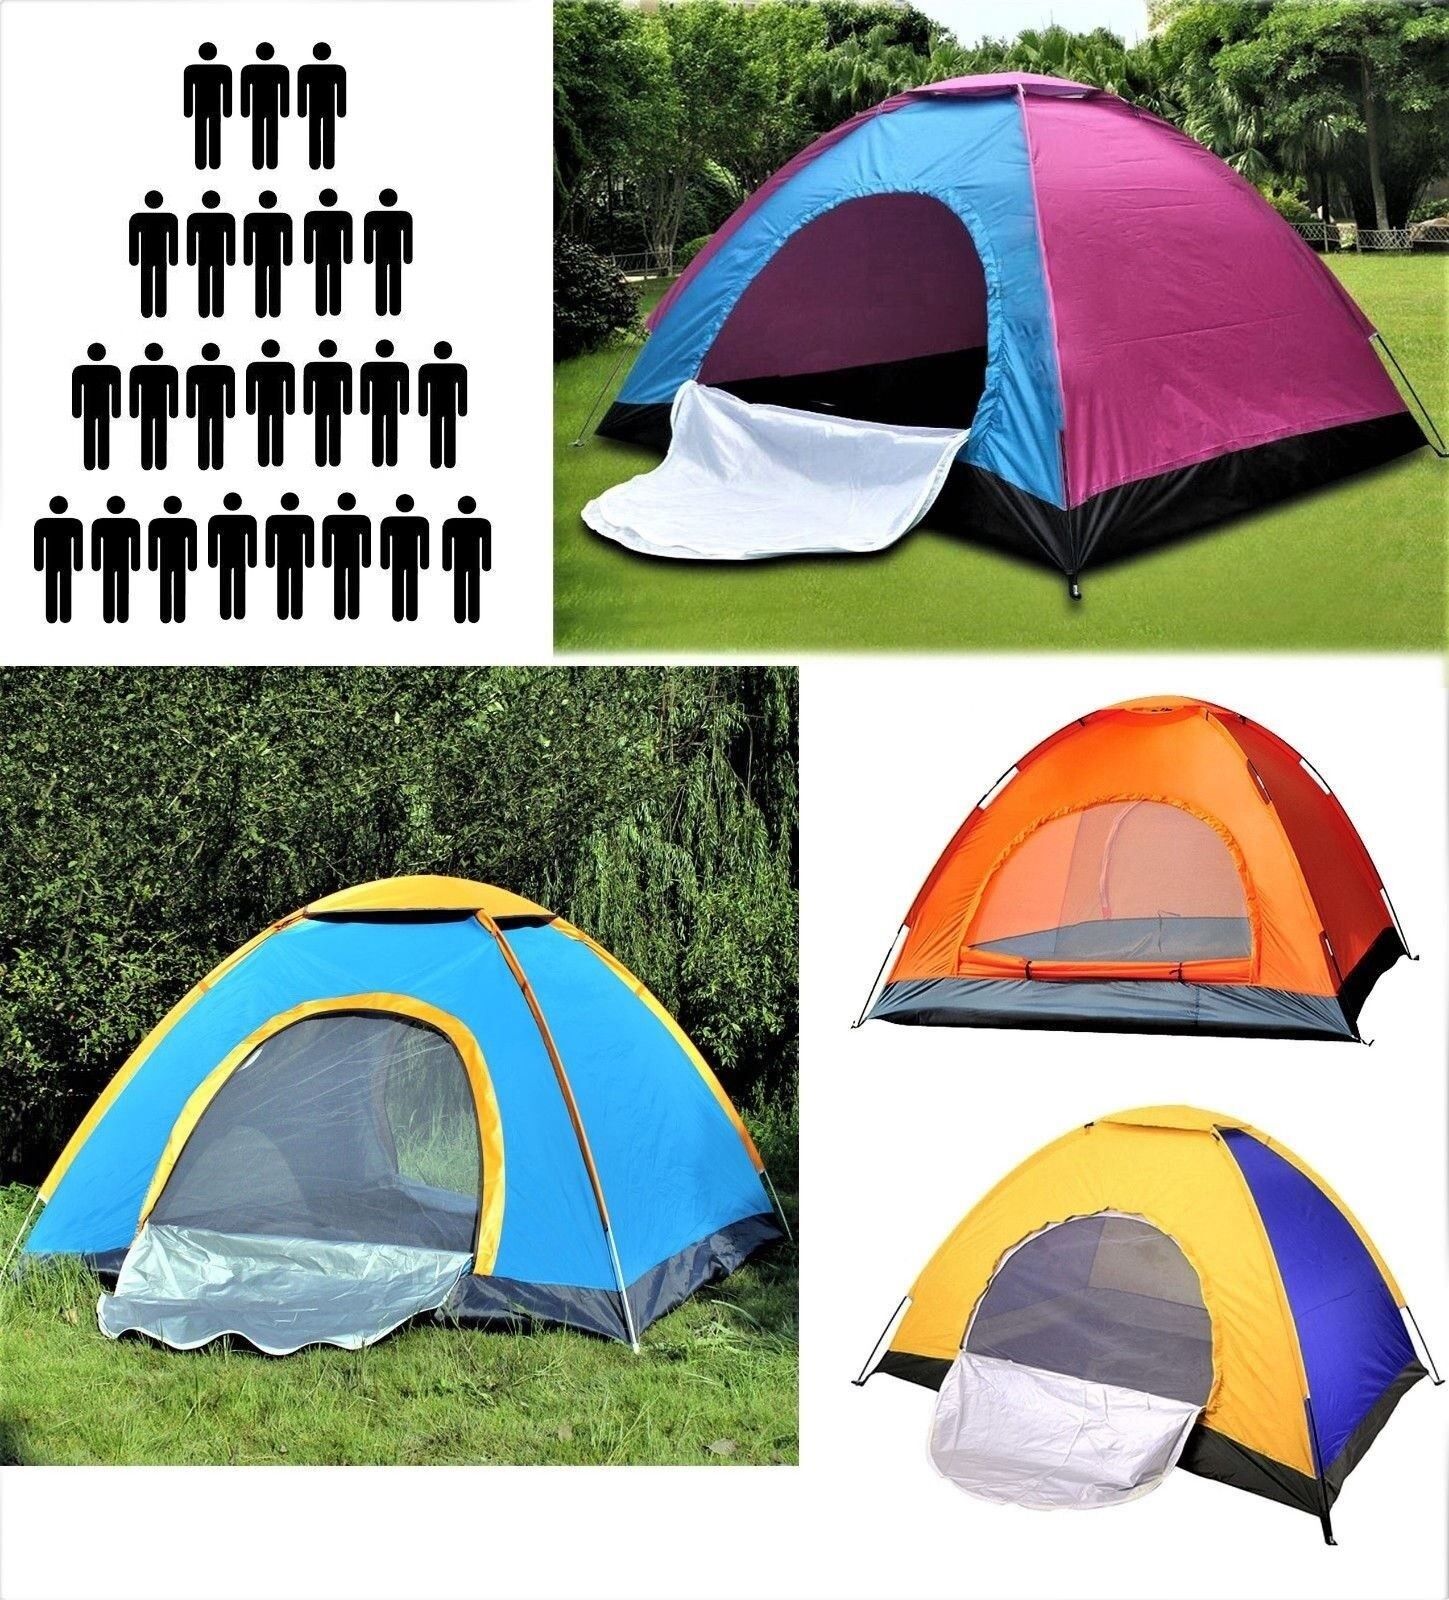 3 - 8 Person Camping Tent Waterproof Room Outdoor Hiking Backpack Fishing 